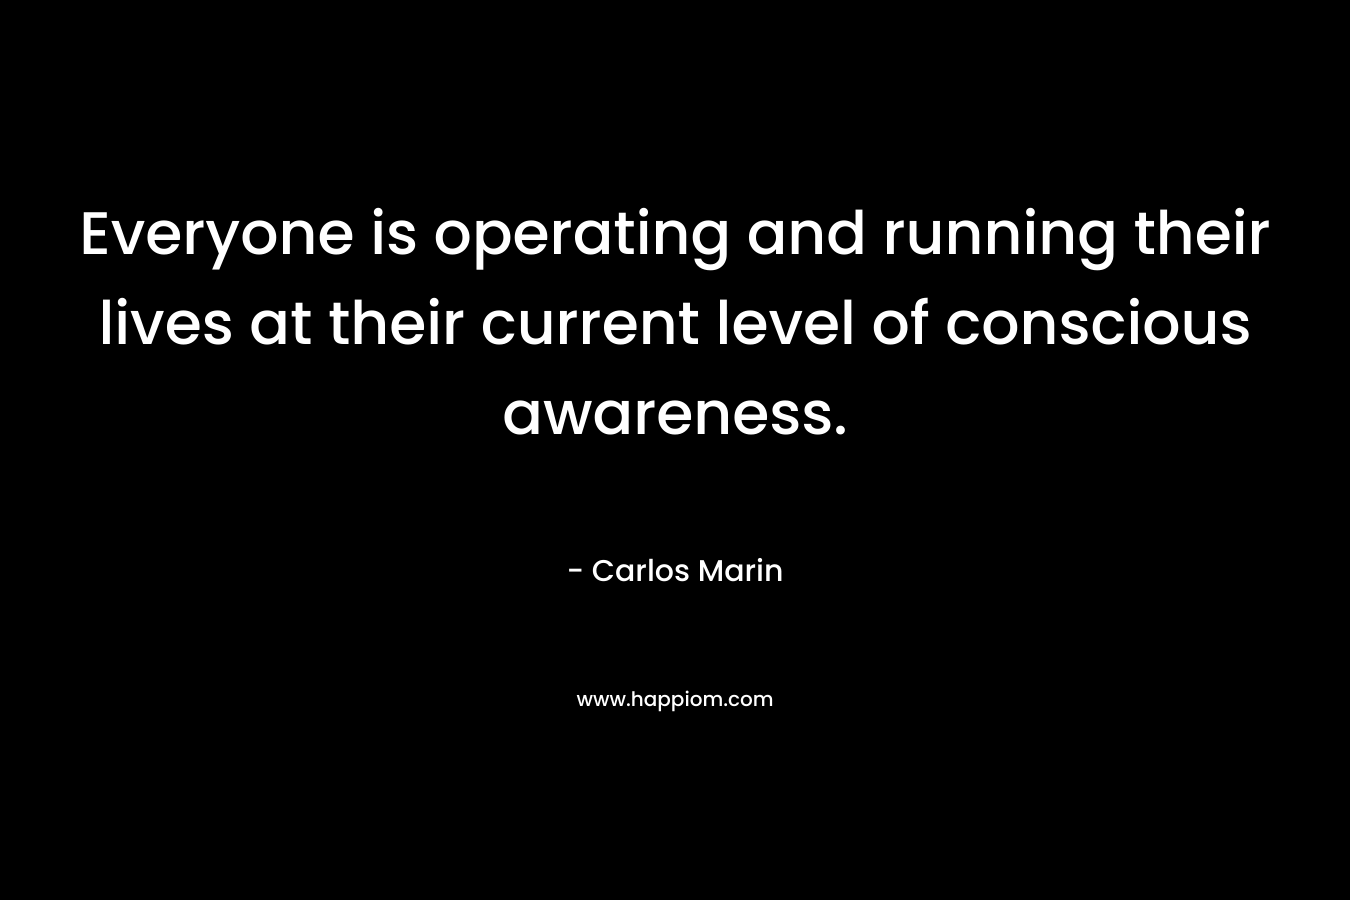 Everyone is operating and running their lives at their current level of conscious awareness. – Carlos Marin